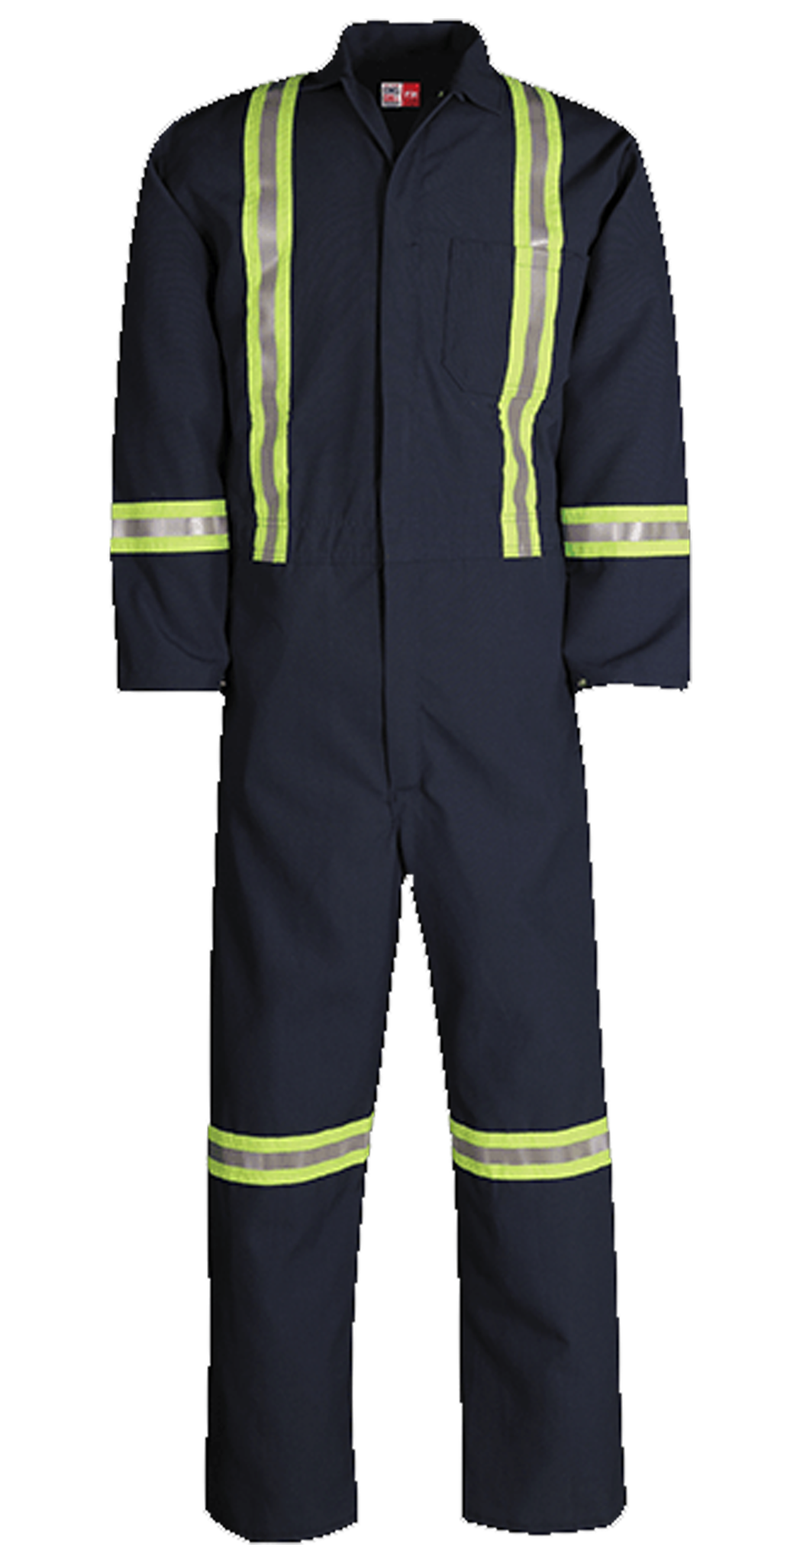 Big Bill 401RTN6 Nomex Unlined Work Coverall with Reflective Material